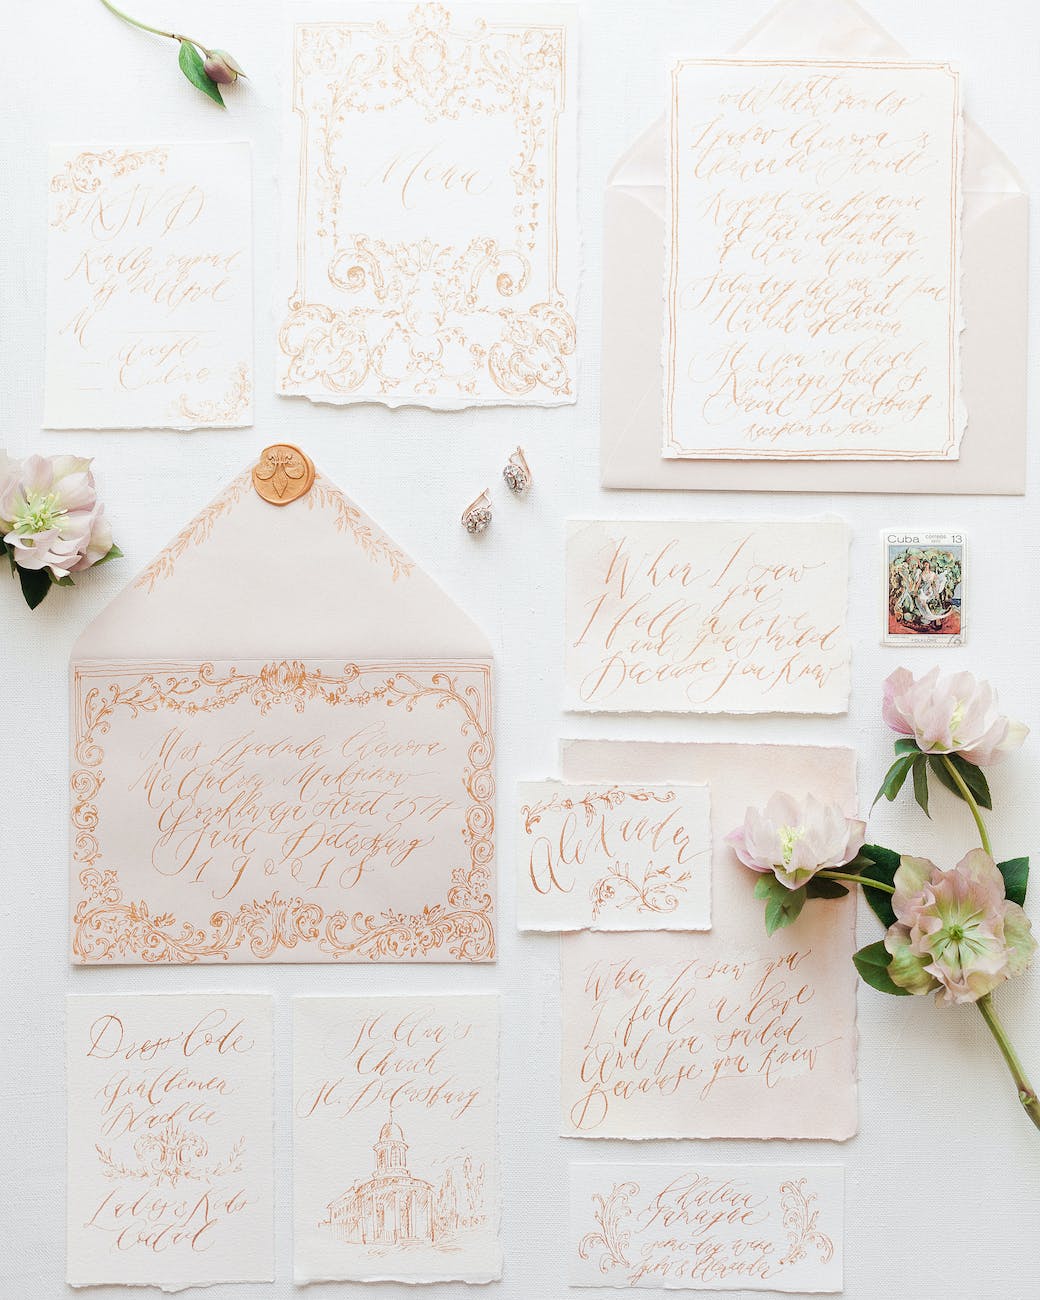 flowers handwritten letters and envelope